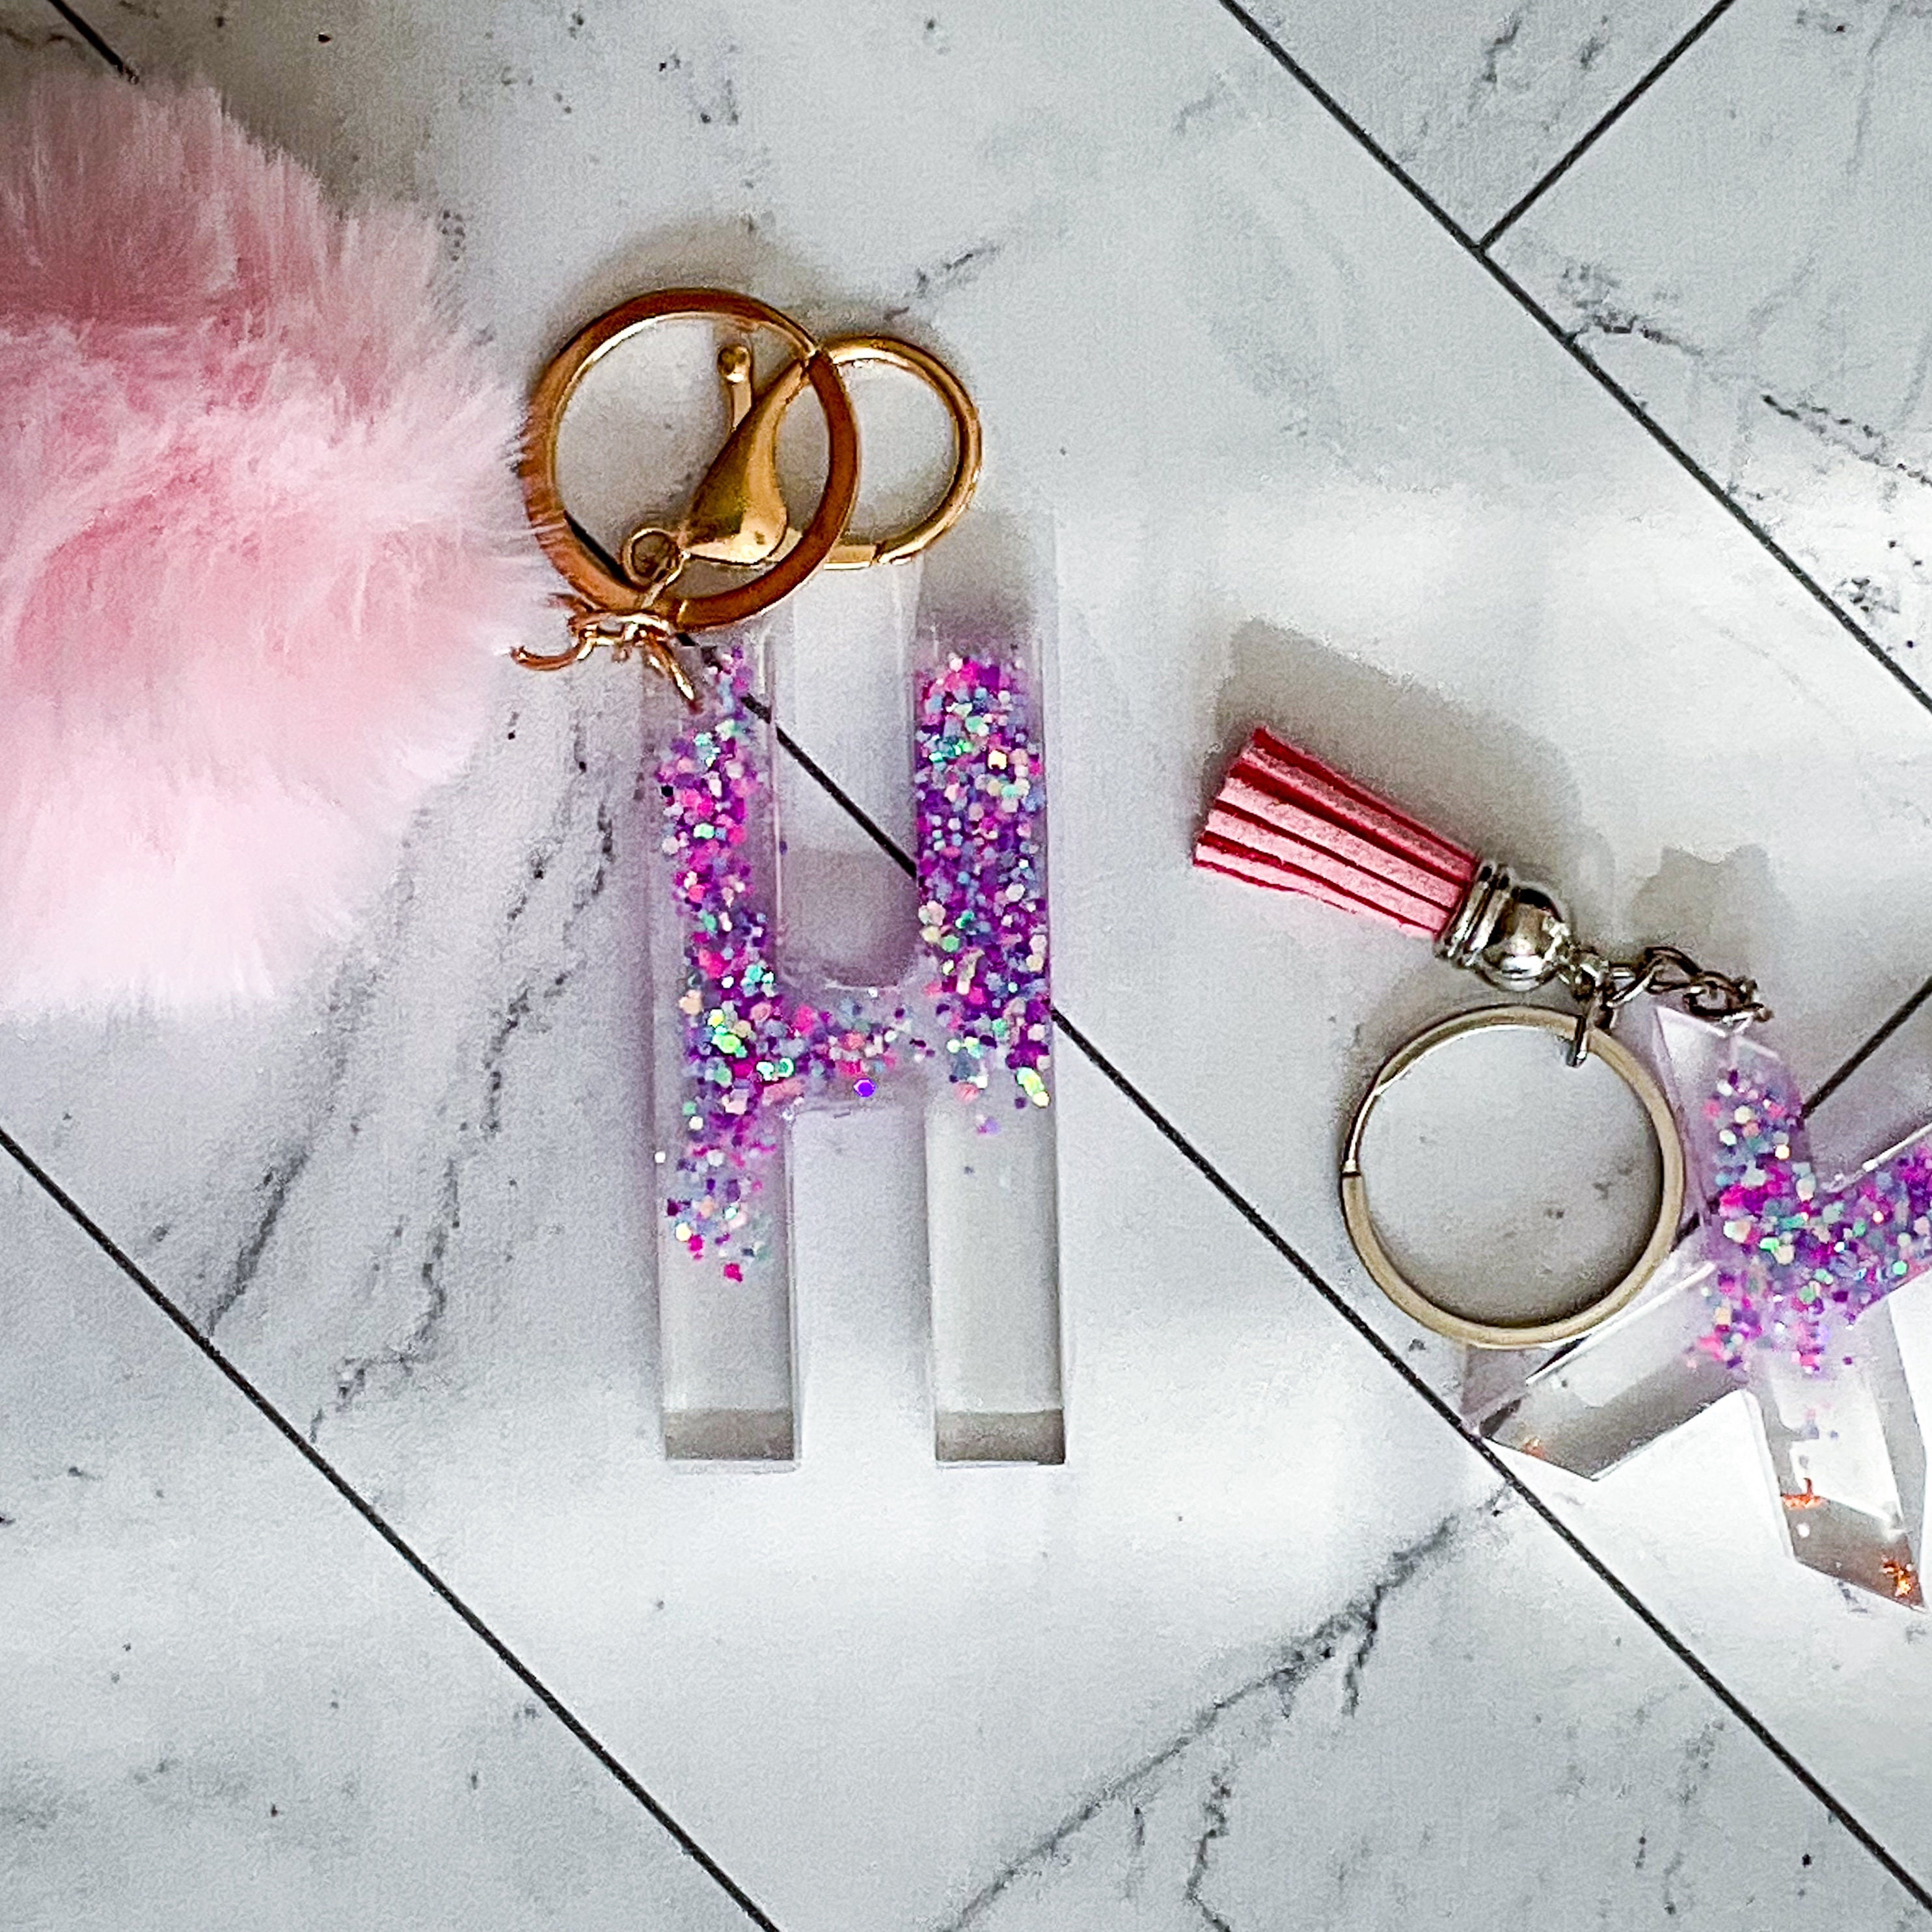 Pink Glitter Keychain Letter Keychain Initial Resin 